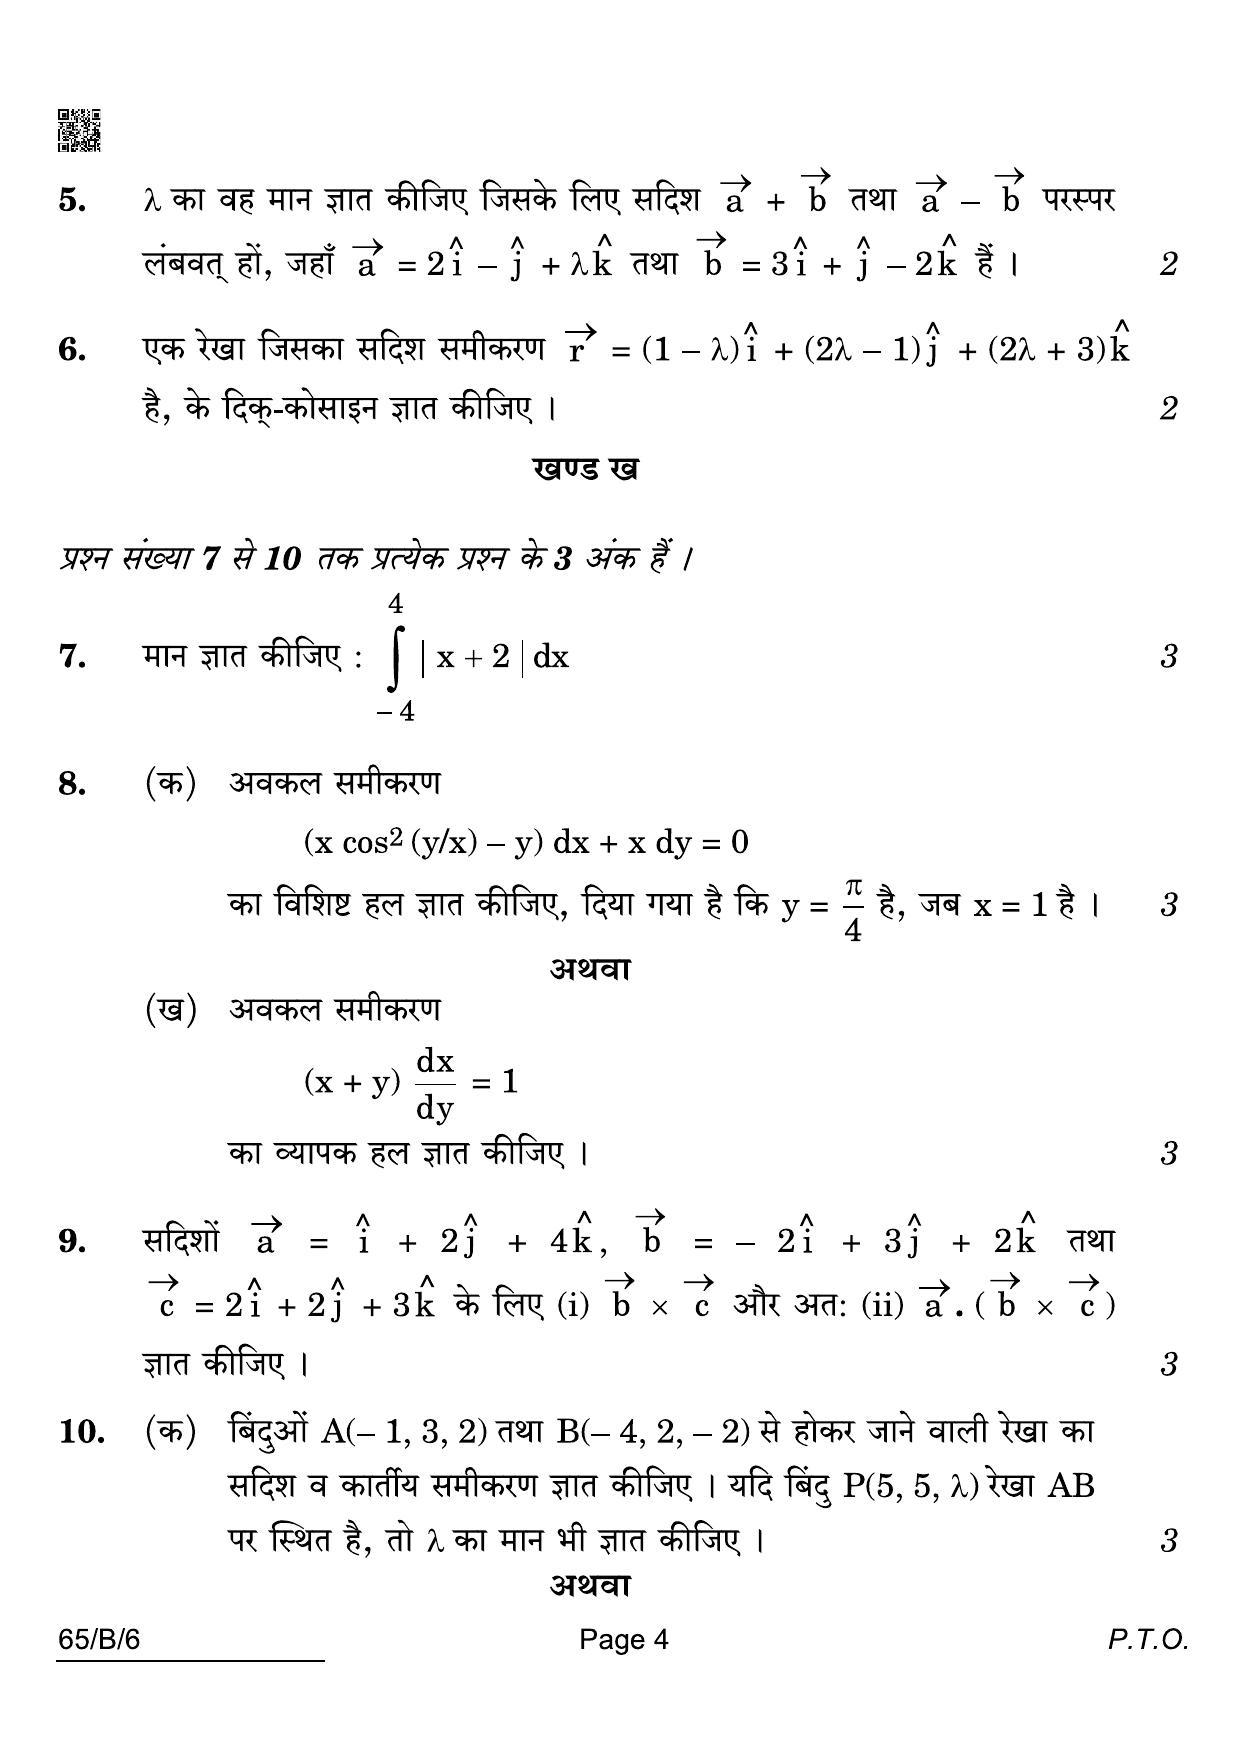 CBSE Class 12 65-B-6 Maths Blind 2022 Compartment Question Paper - Page 4